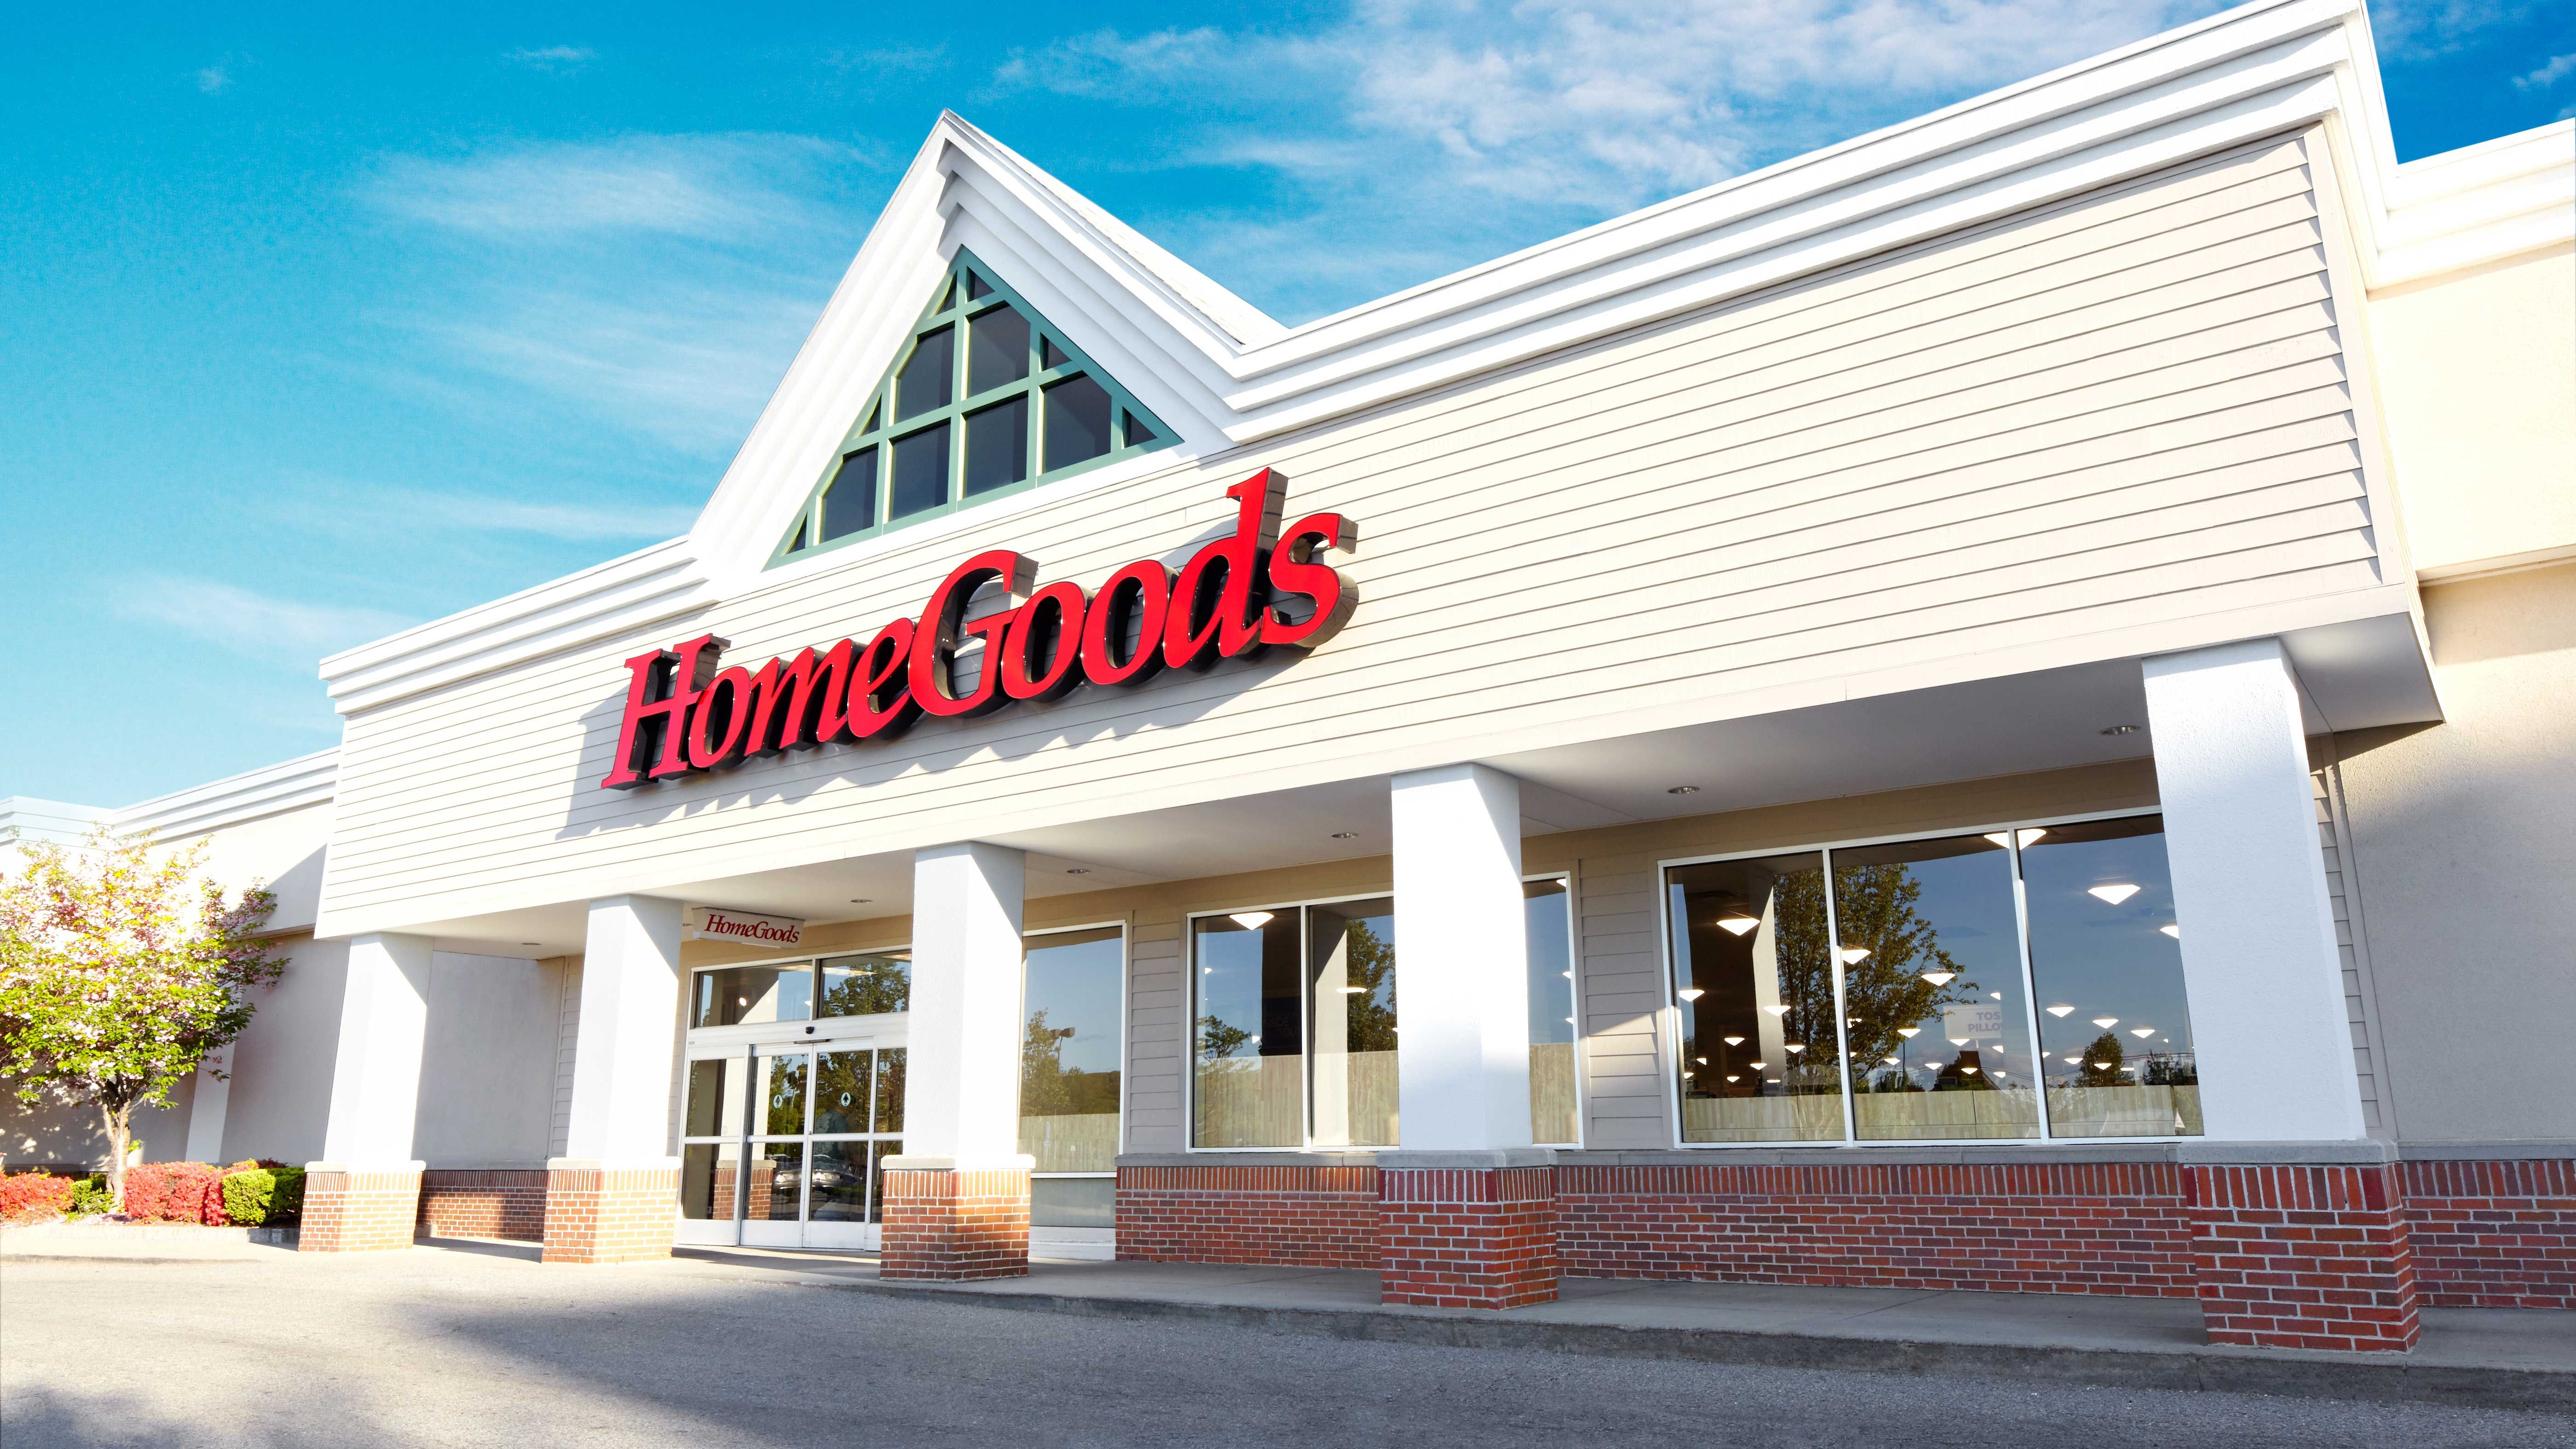 8 Homegoods Ping Secrets According To Employees